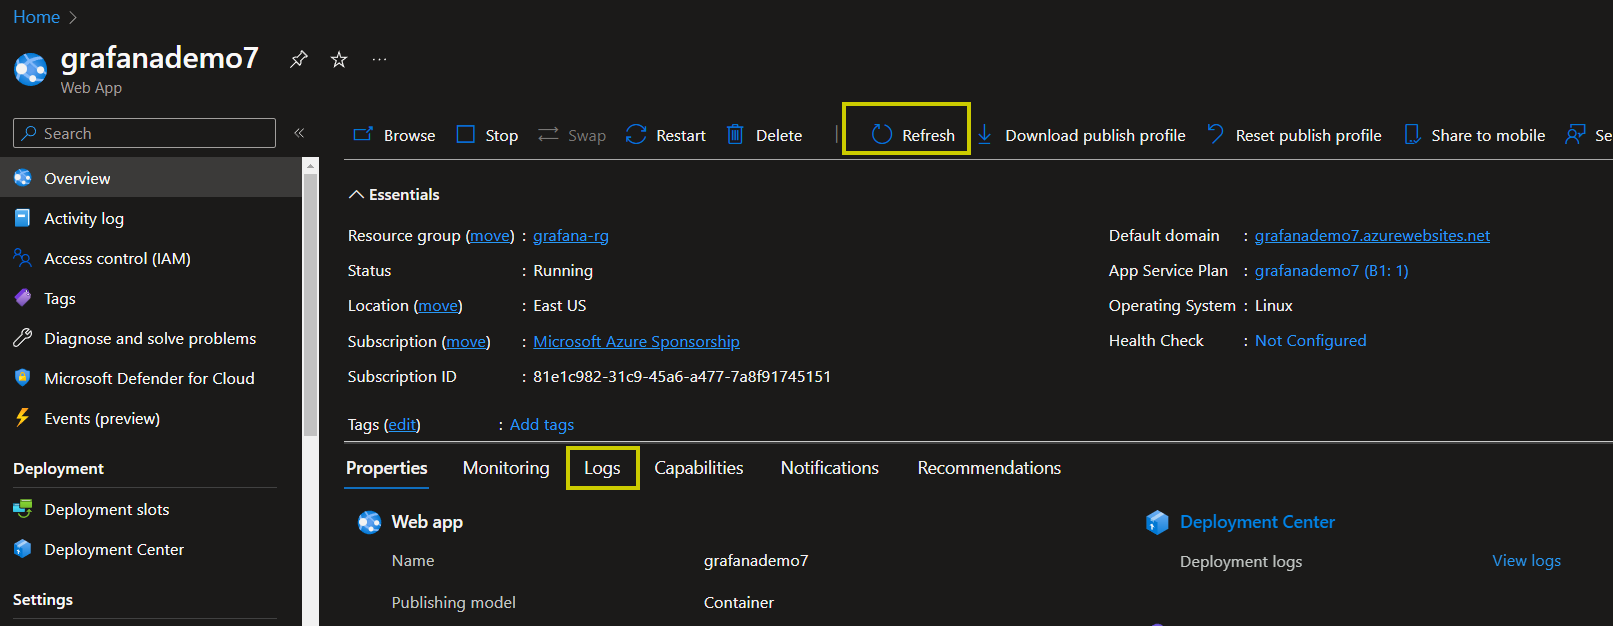 Azure Web App portal with Refresh and Logs button highlighted